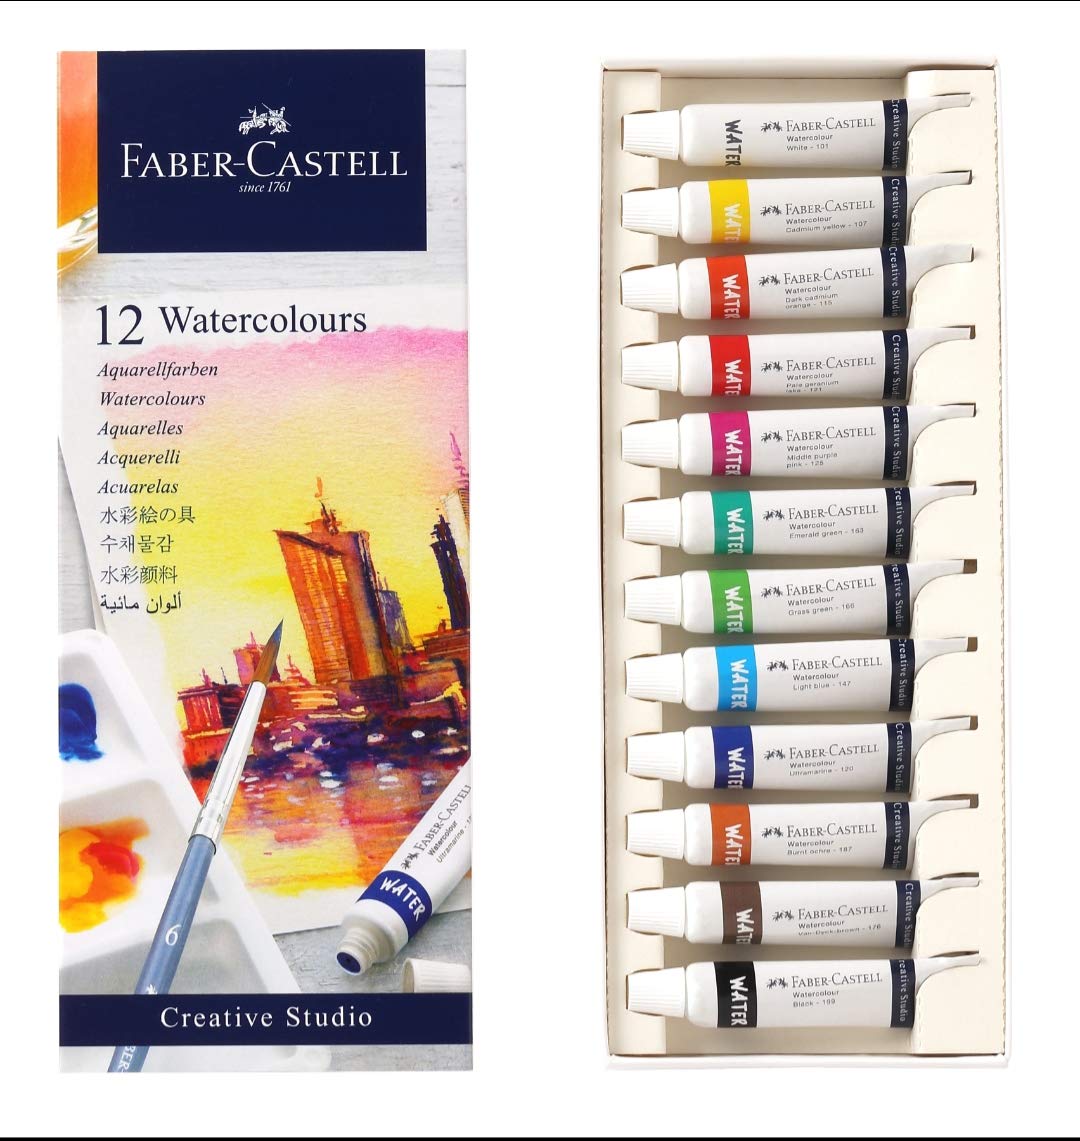 Faber-Castell Watercolours - SCOOBOO - 16 96 12 - Water Colors